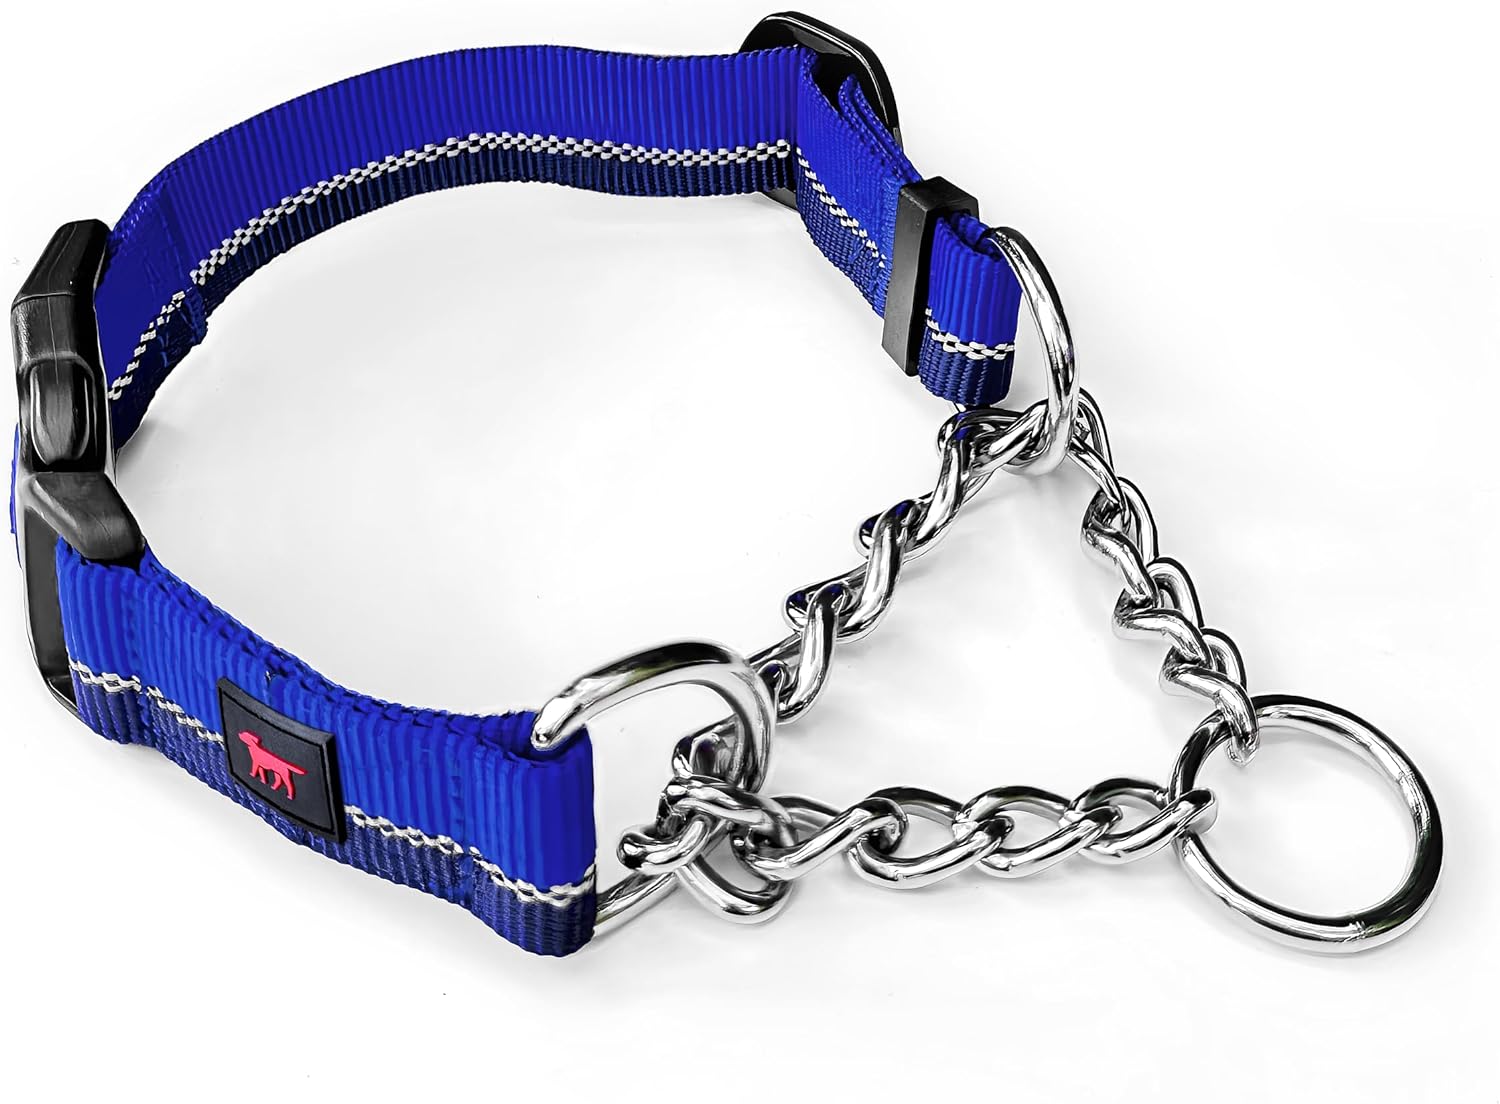 Tuff Pupper Martingale Collar for Dogs